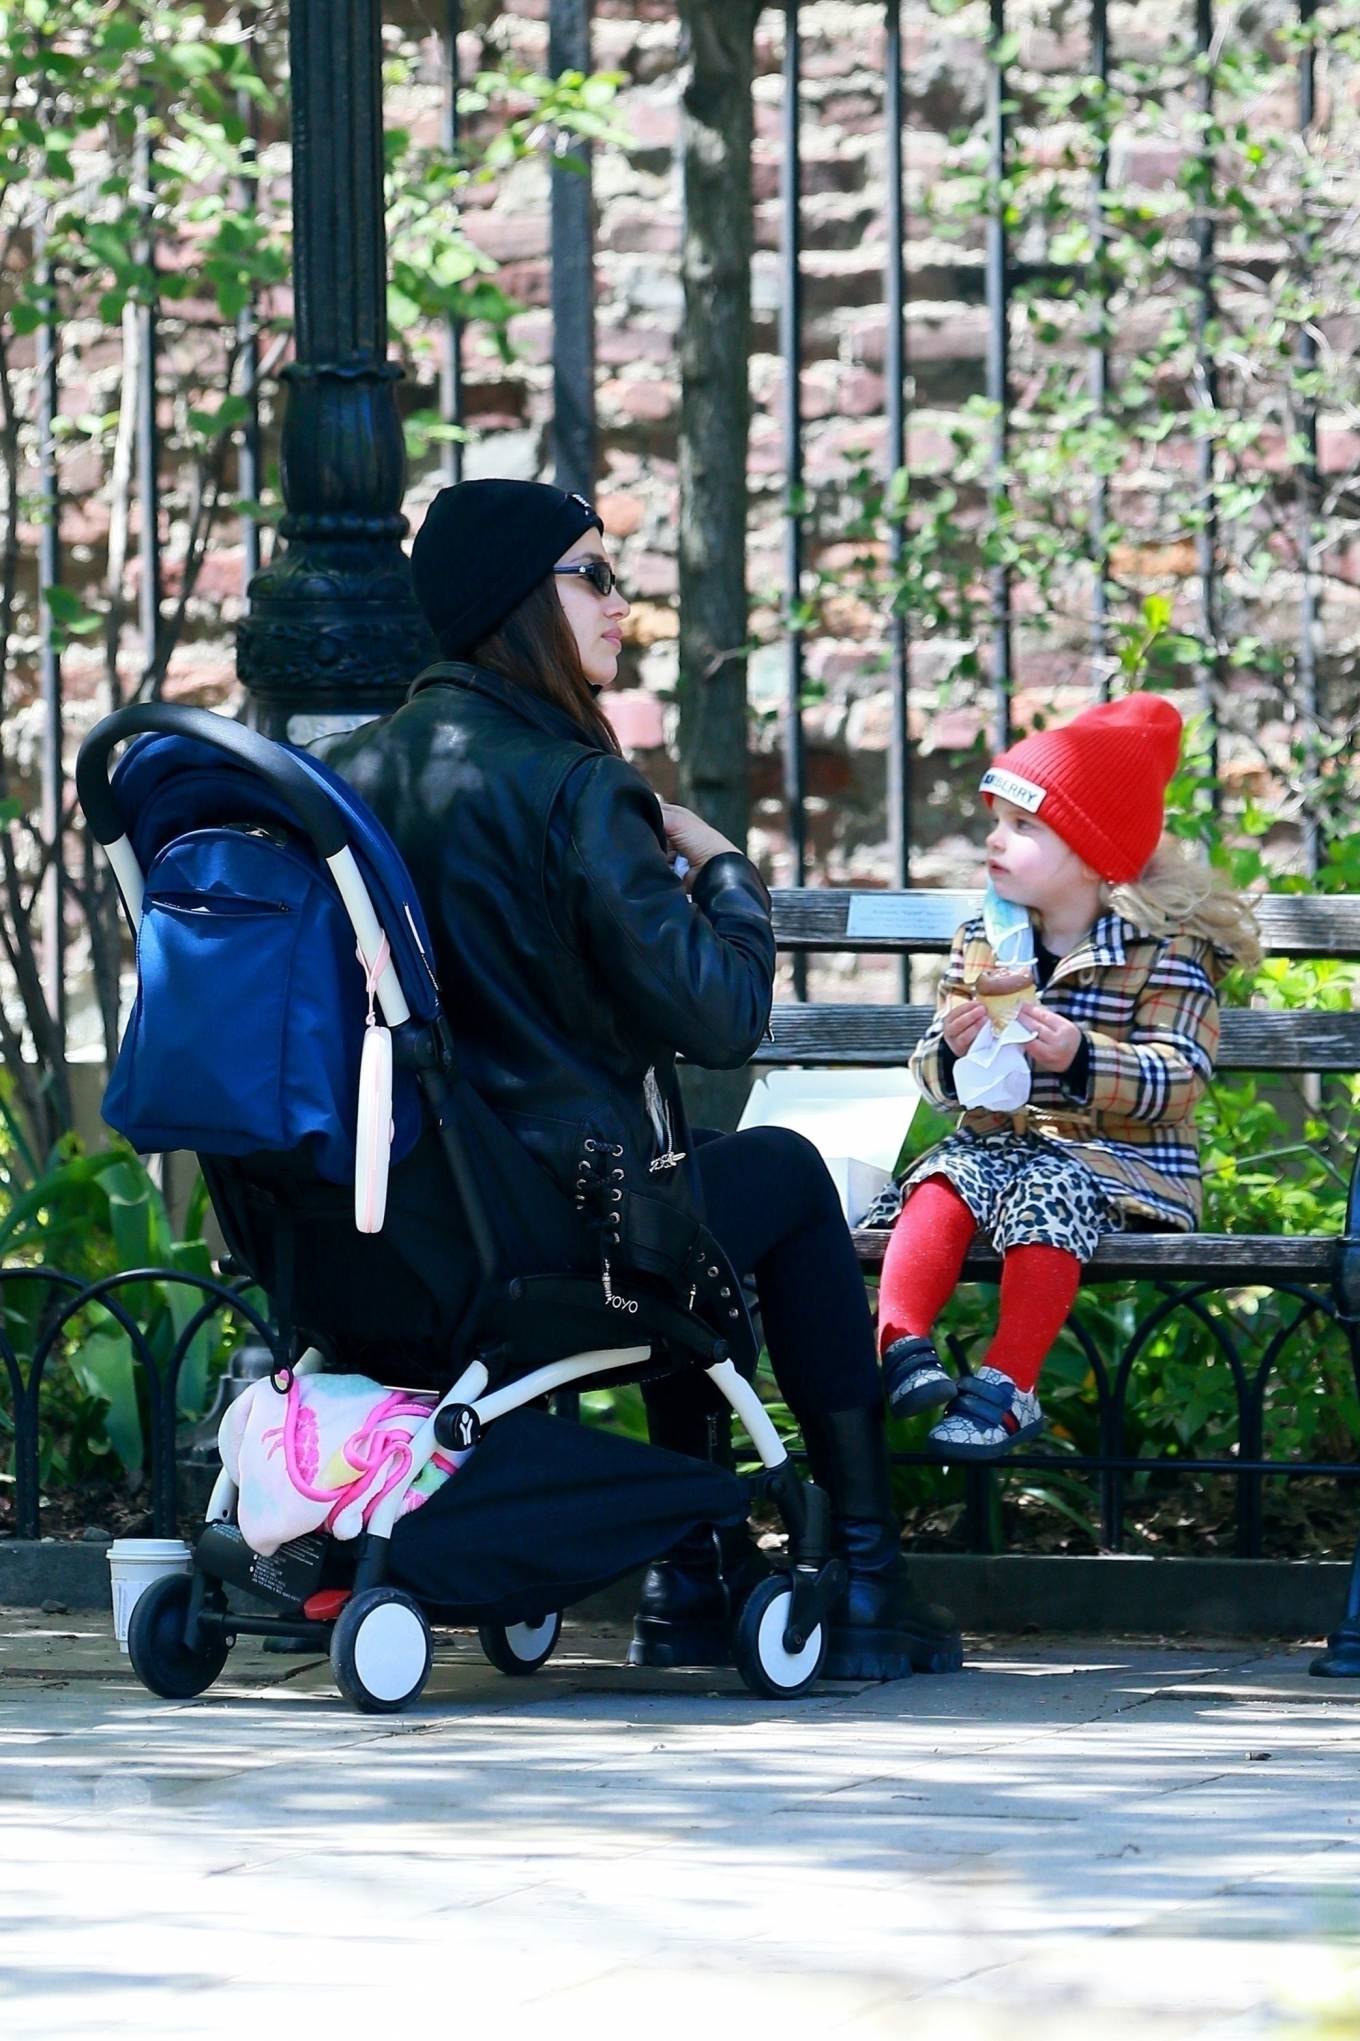 Irina Shayk â€“ Seen out with her daughter in New York